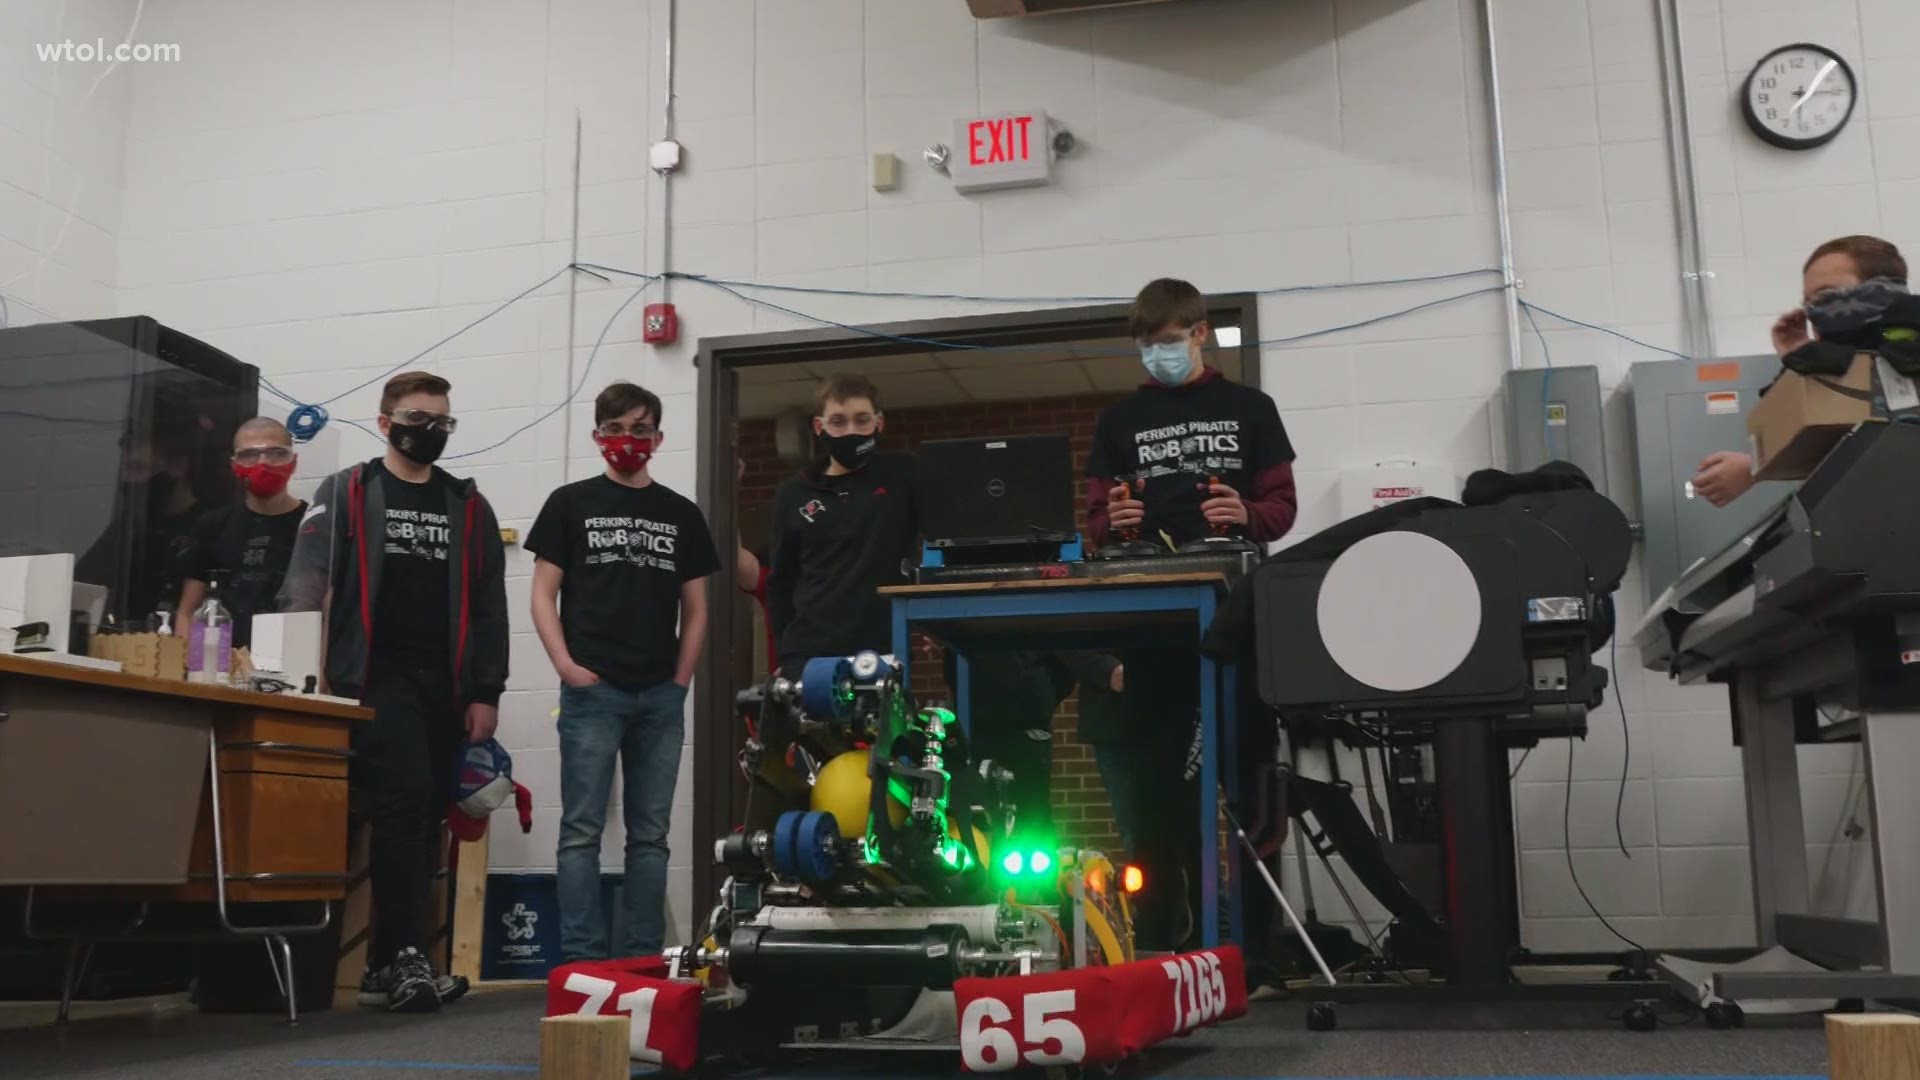 The Robotics Club at Perkins High School is standing among technology giants this week after it was selected by NASA along with big names like MIT and Arizona State.